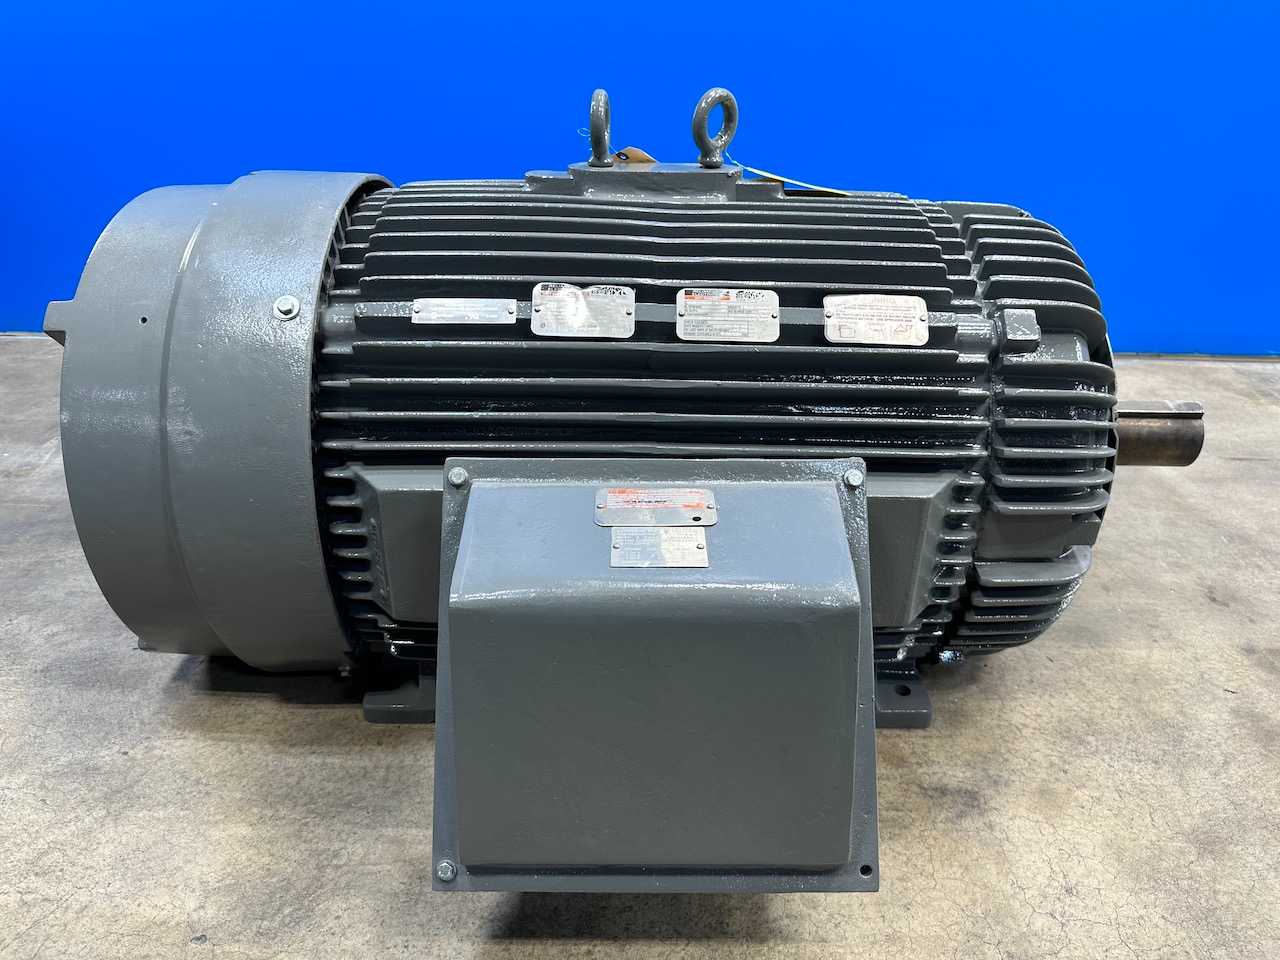 Reliance 841XL severe duty 250hp 449T 460V 1785 rpm electric motor